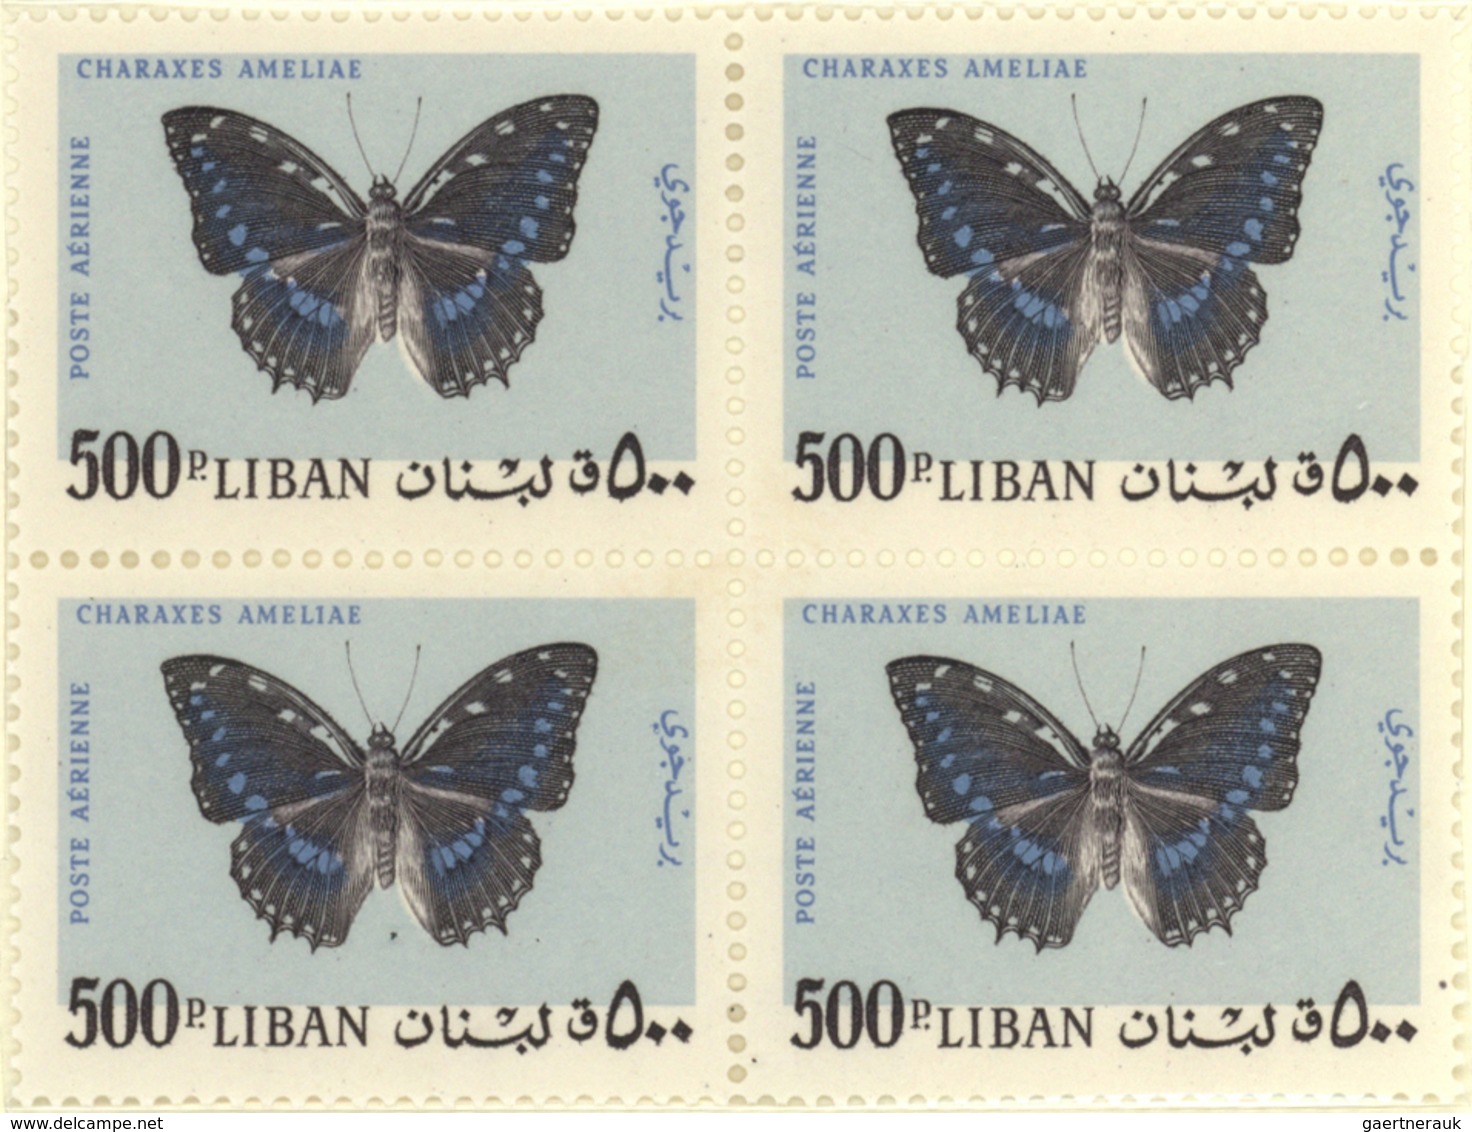 23463 Libanon: 1946/1981, specialised colelction of the AIRMAIL stamps on self-made album pages in four he